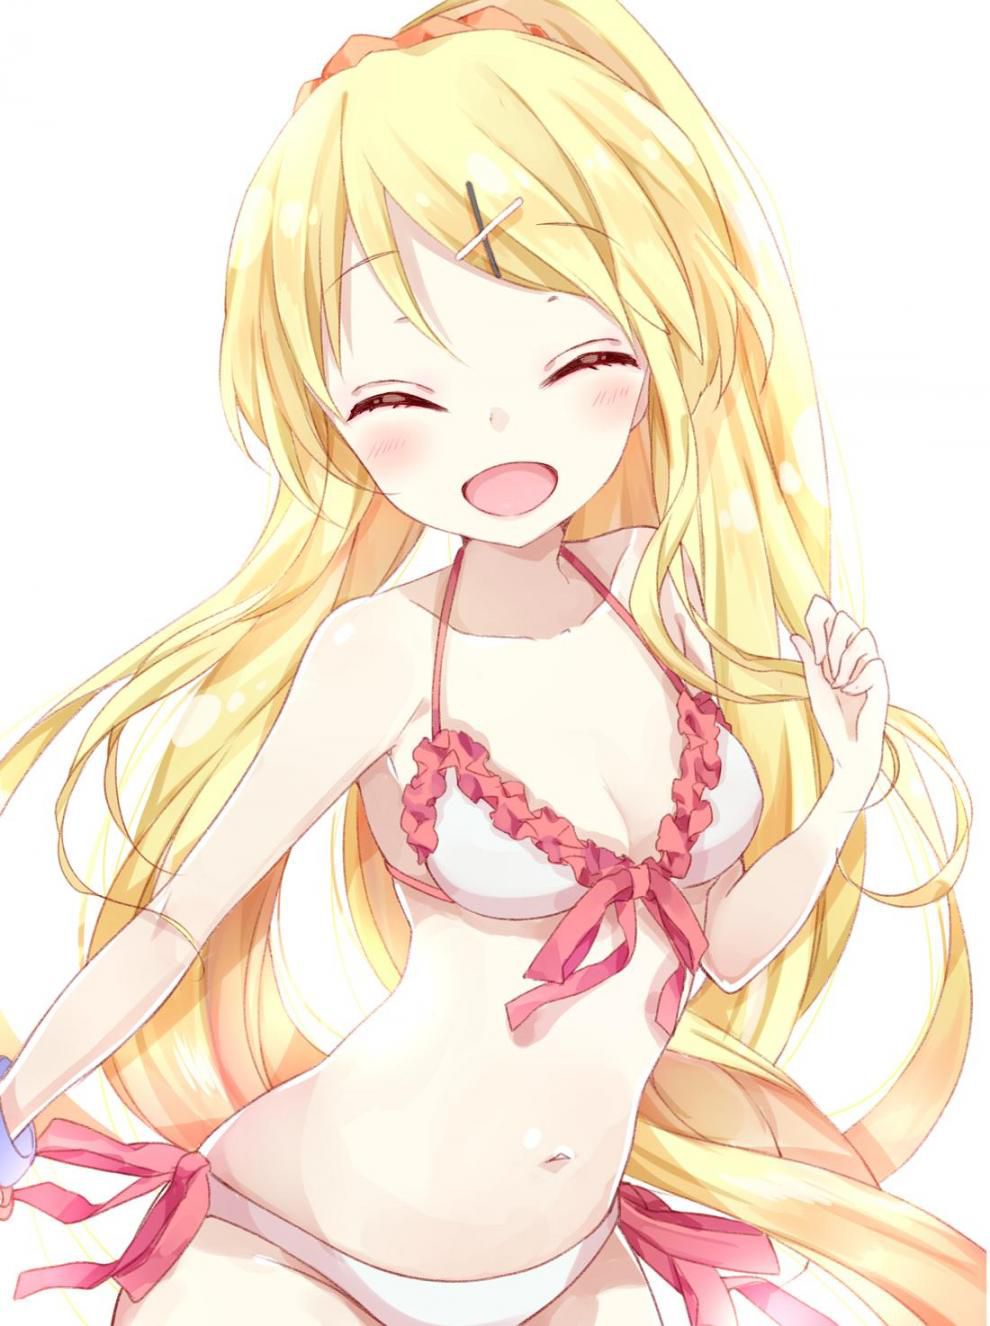 Secondary image of the girl smiling very cute second picture Part 5 [non-erotic] 18